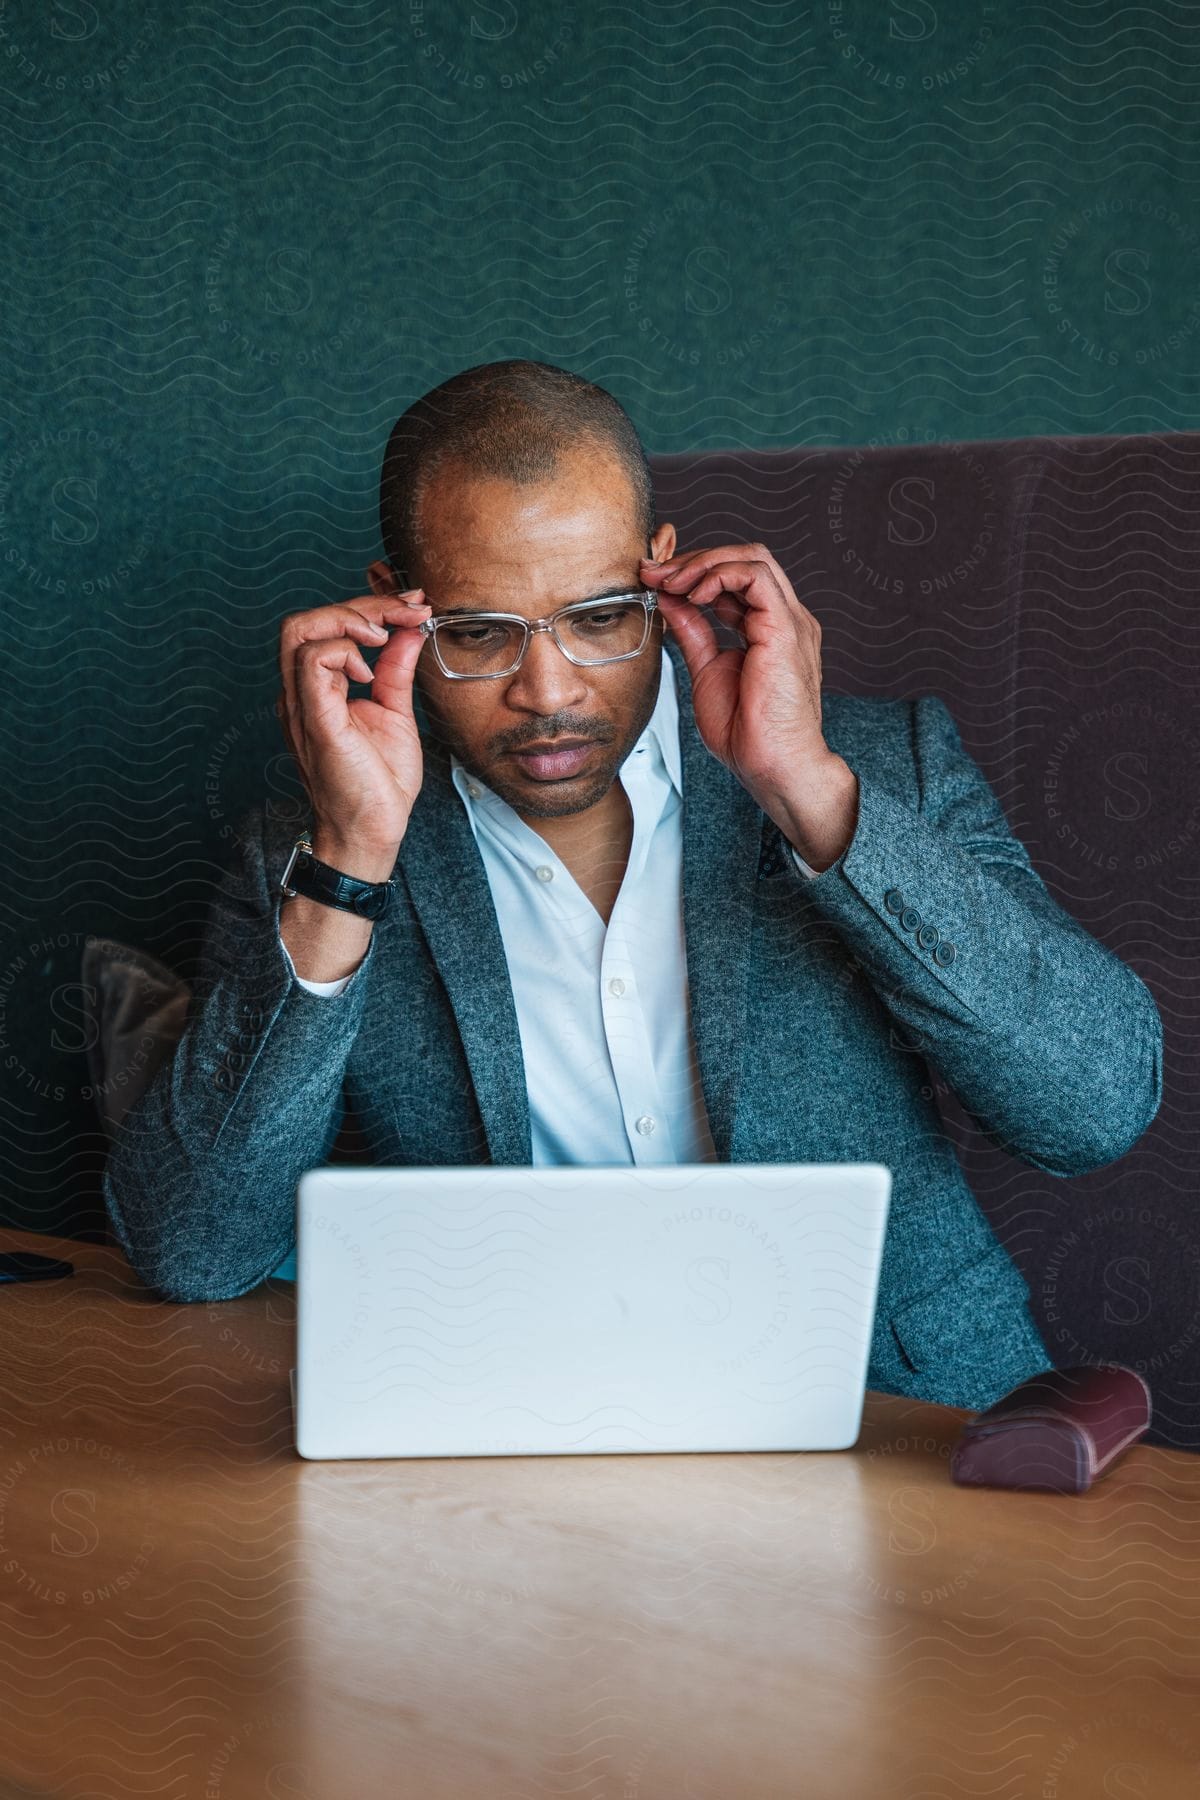 Stock photo of a man is positioning his glasses on his face as he looks at his laptop at his work desk.